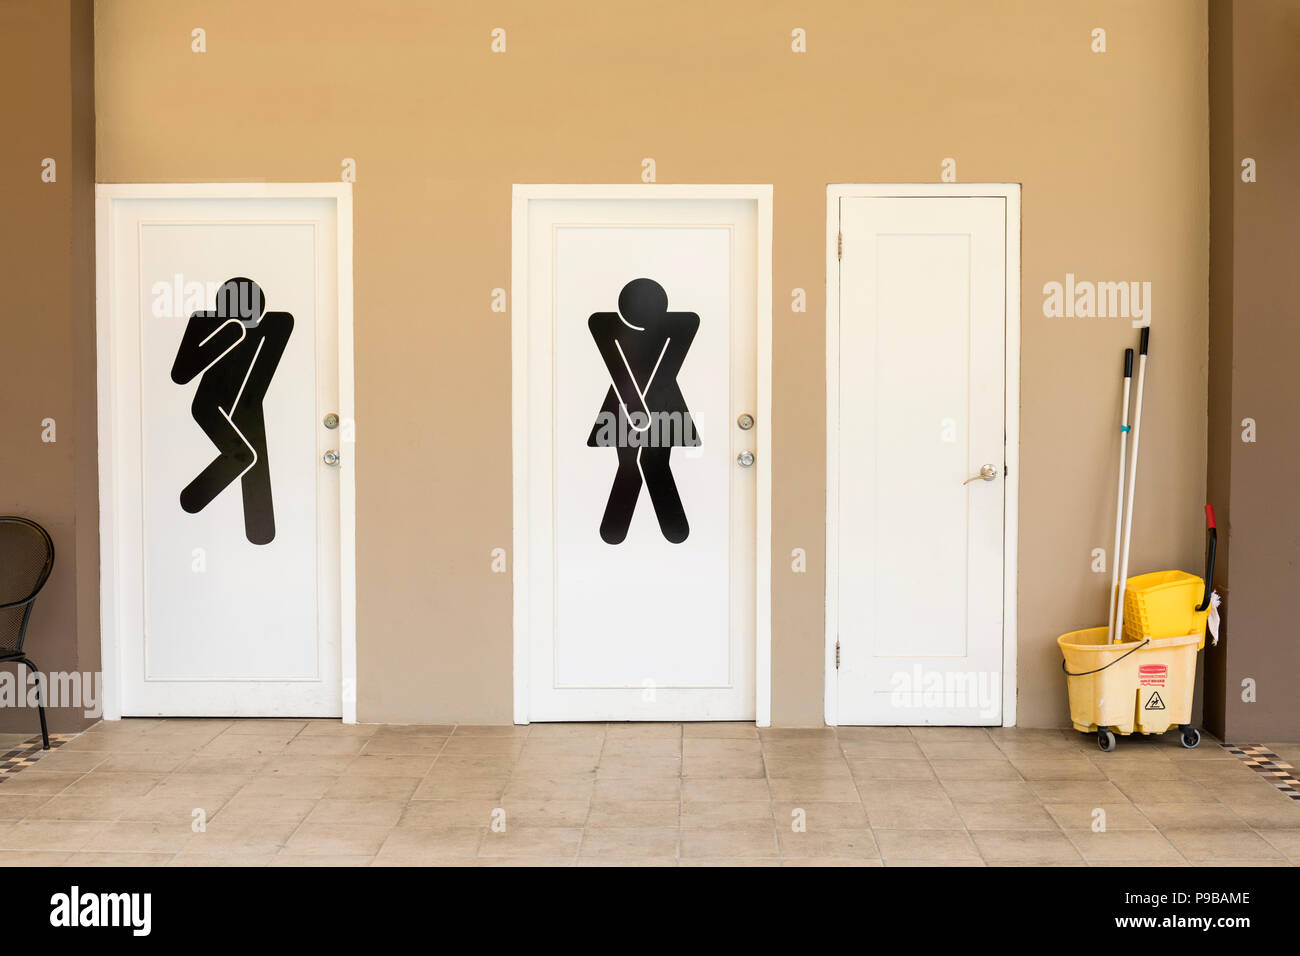 Comical black and white toilet door signs and cleaning bucket in Orangestad, Aruba, Caribbean Stock Photo